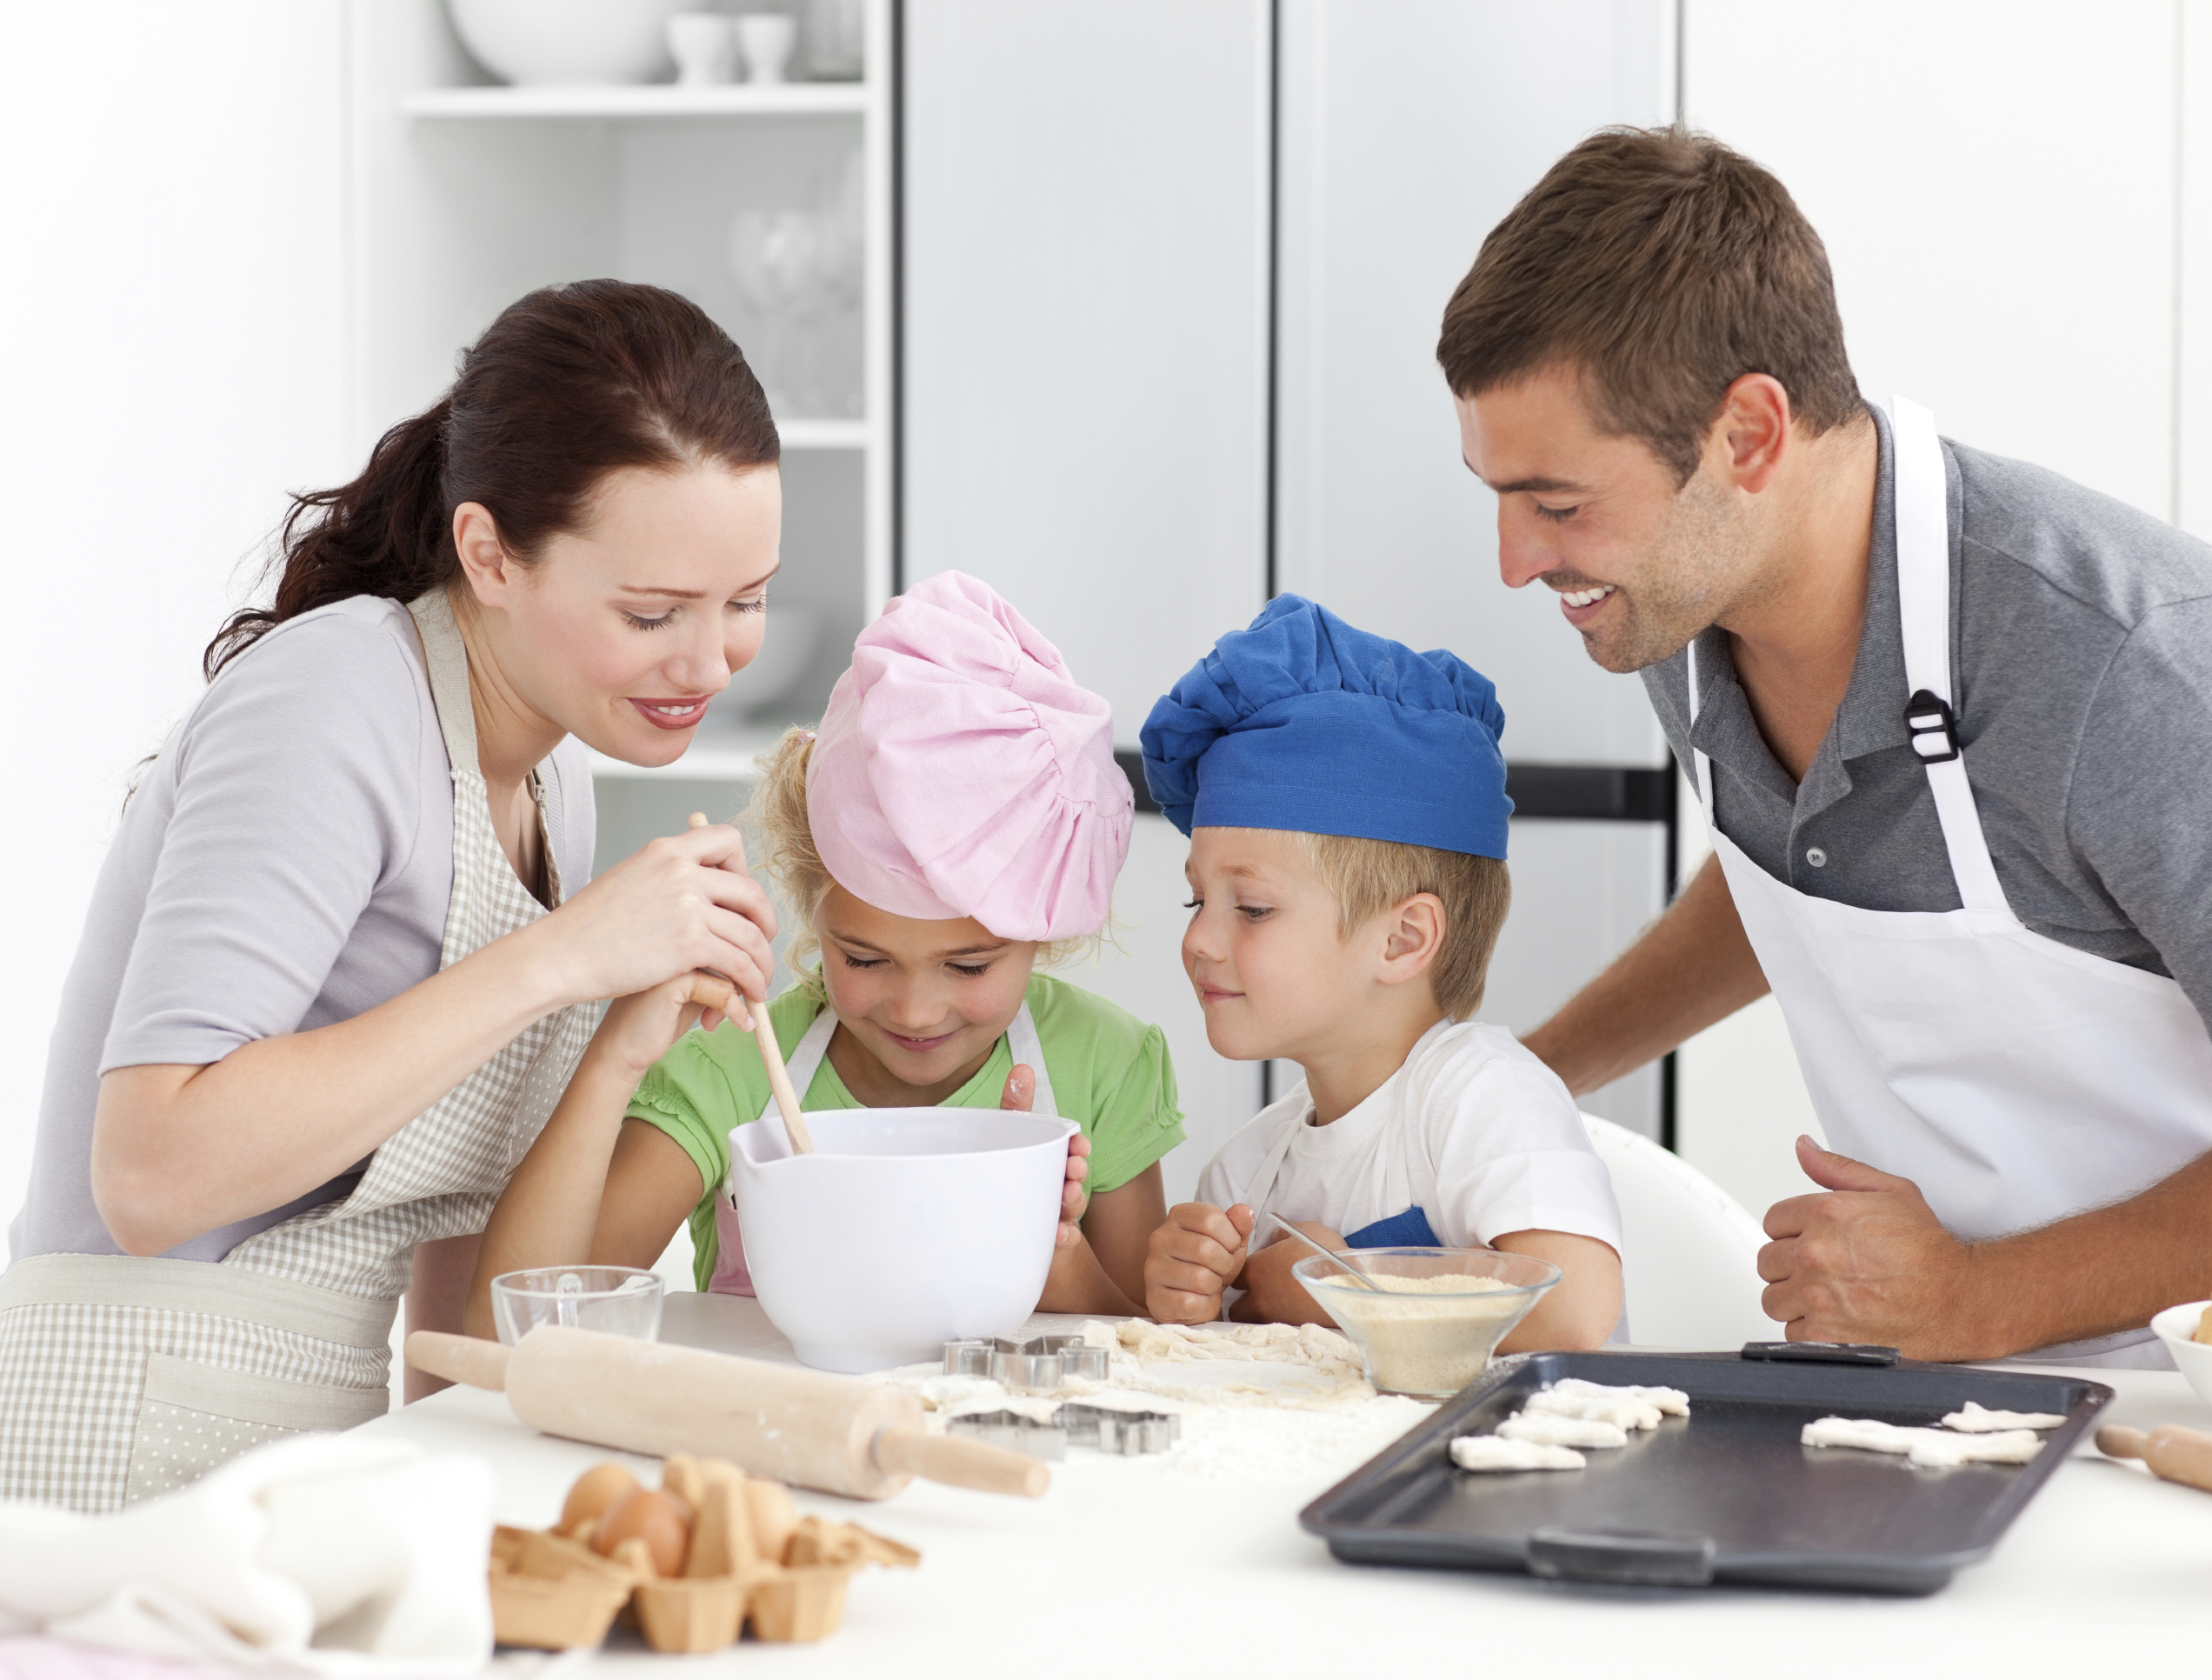 Cooking with Kids: Fun and Safe Recipes to Make Together